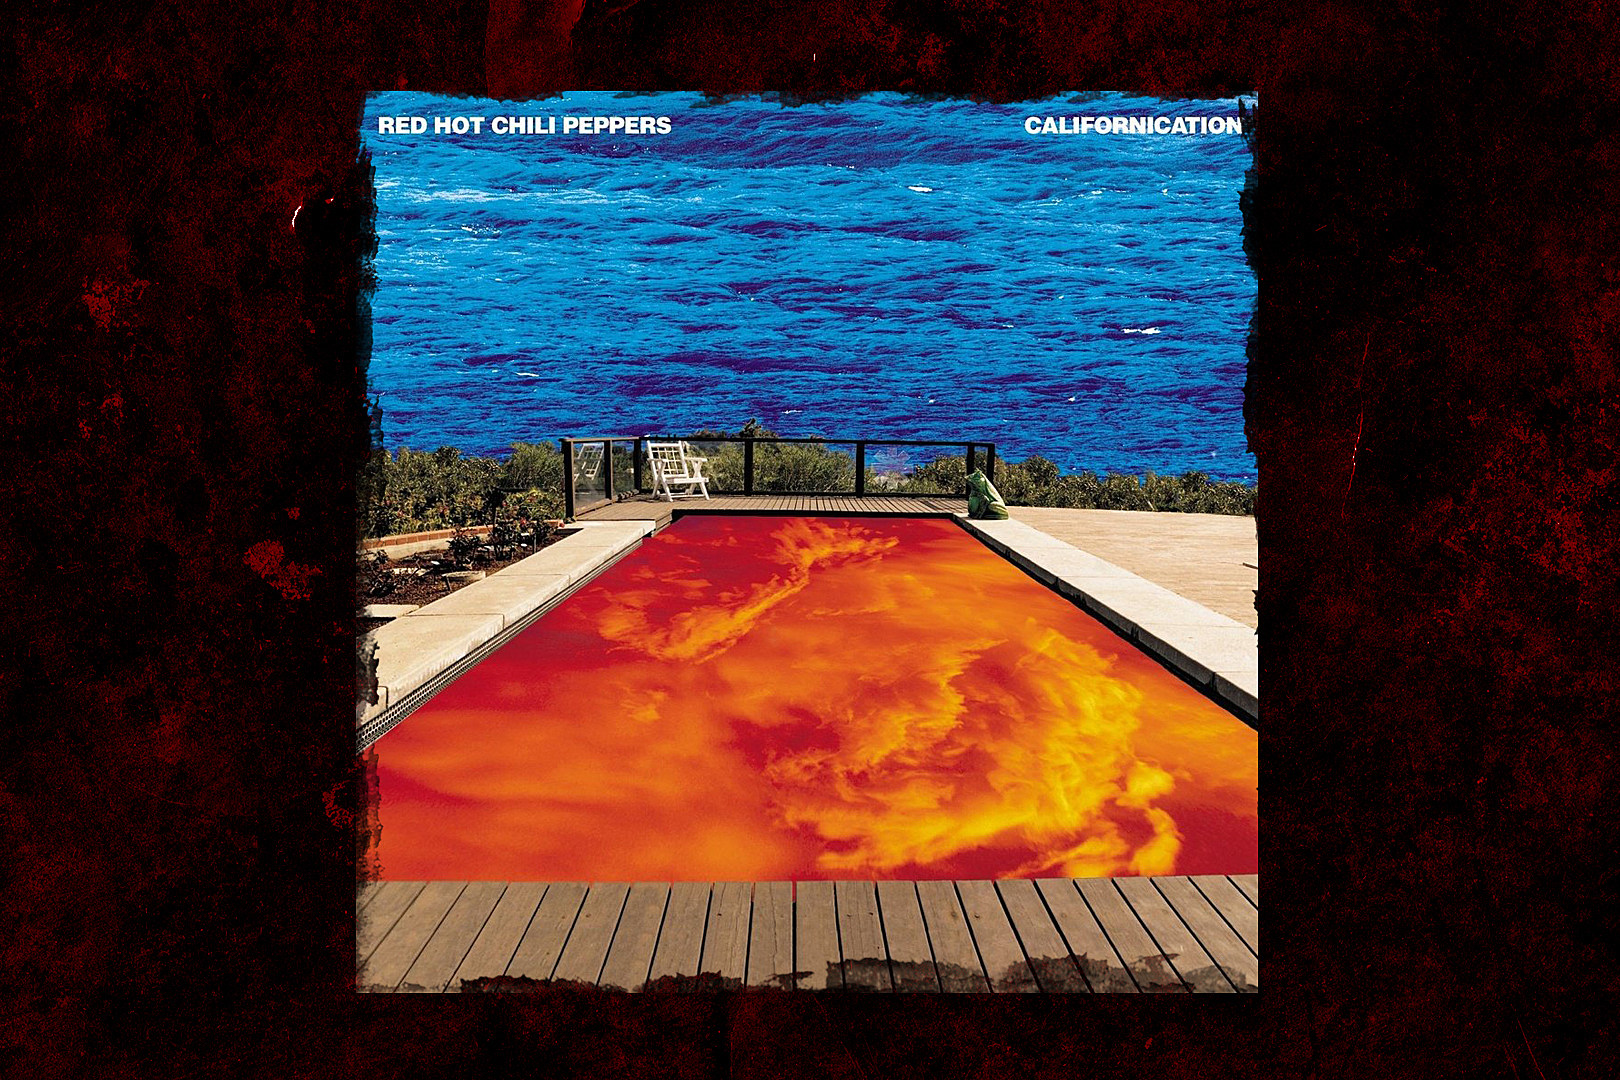 24 Years Ago: Red Hot Chili Peppers Issue 'Californication'